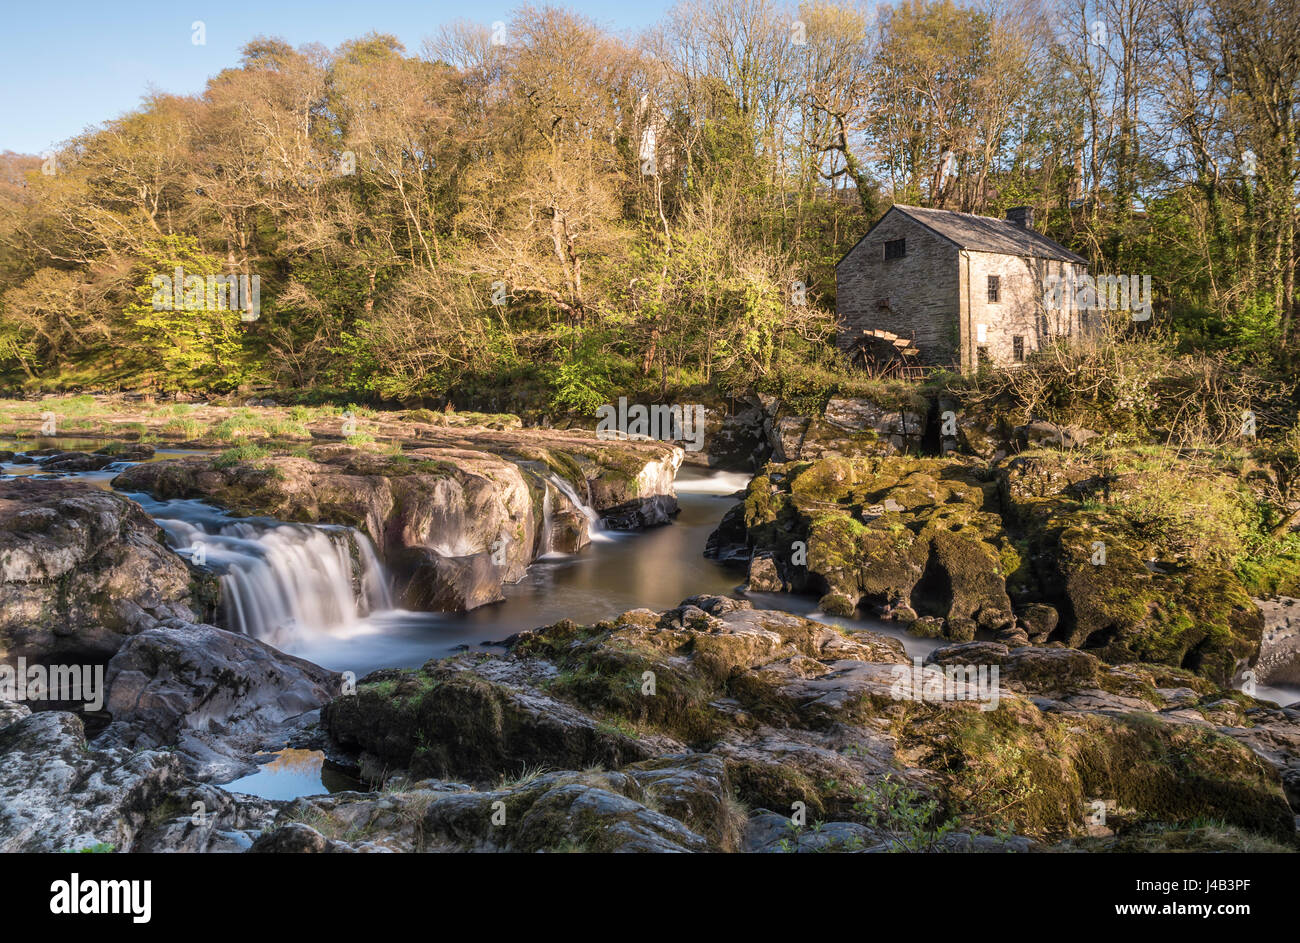 Wide angle long exposure of Cenarth Falls and old water mill, Cenarth, Wales, UK Stock Photo